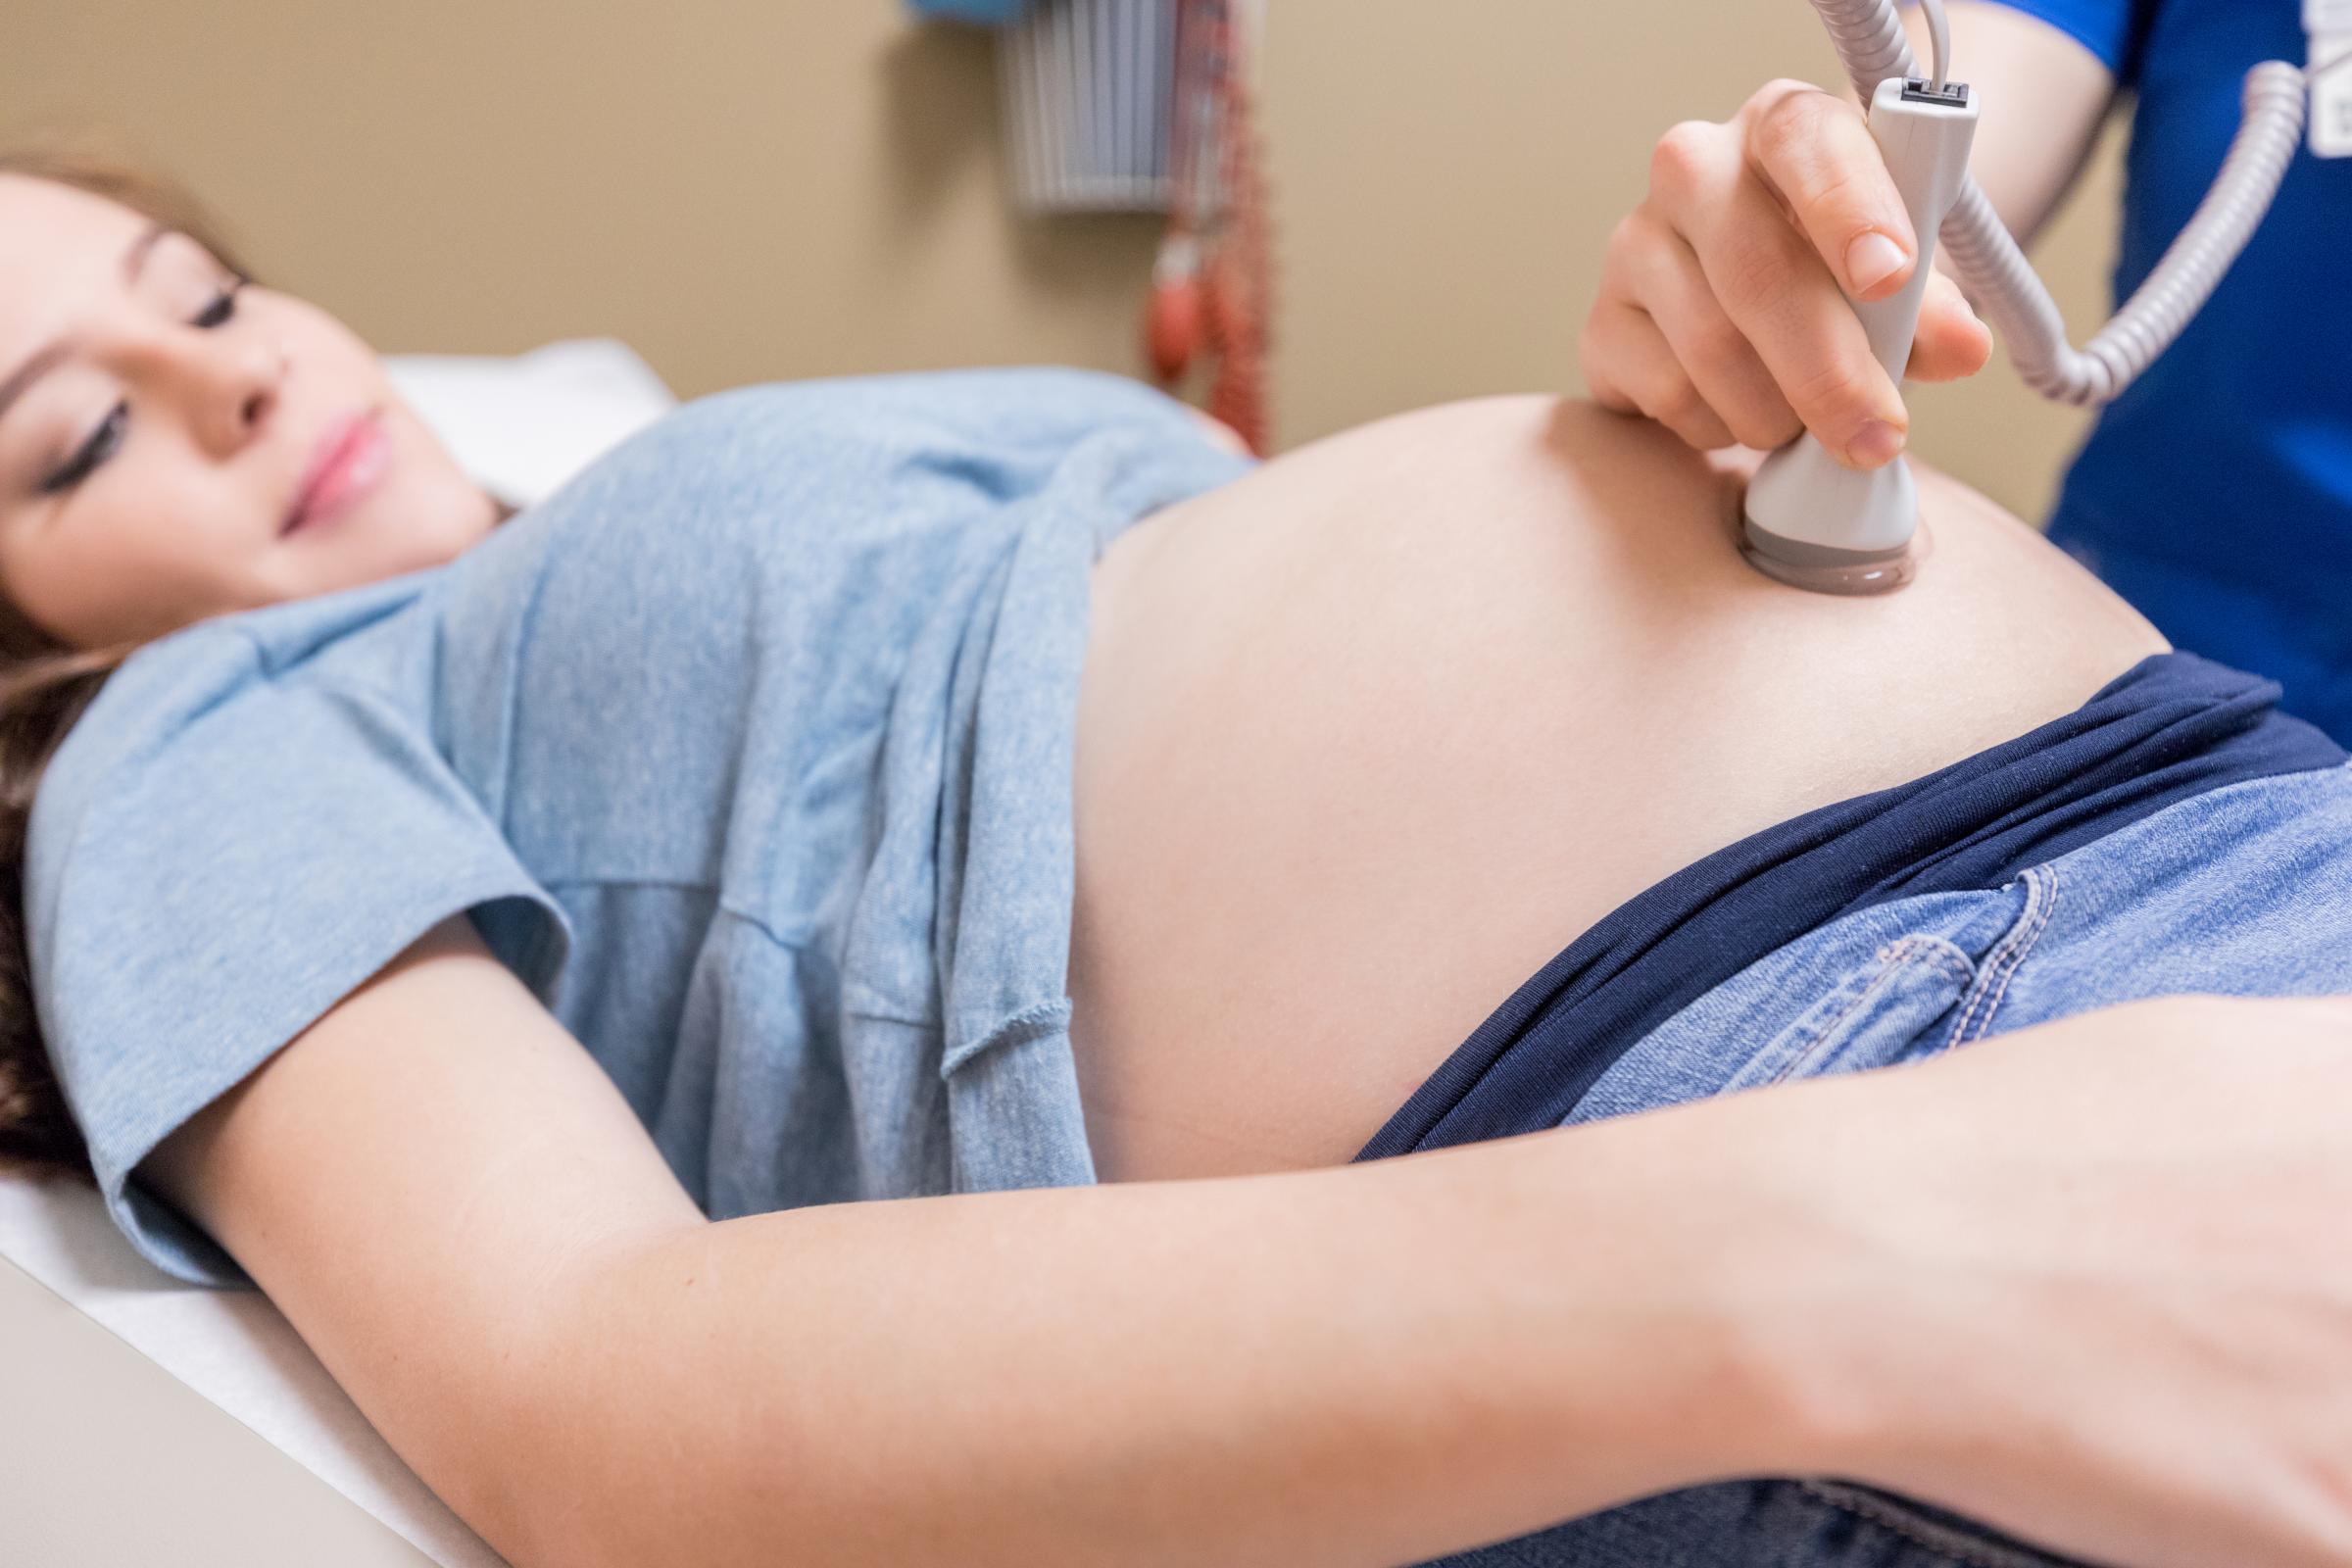 Pregnant women recalled for scans after supervision error